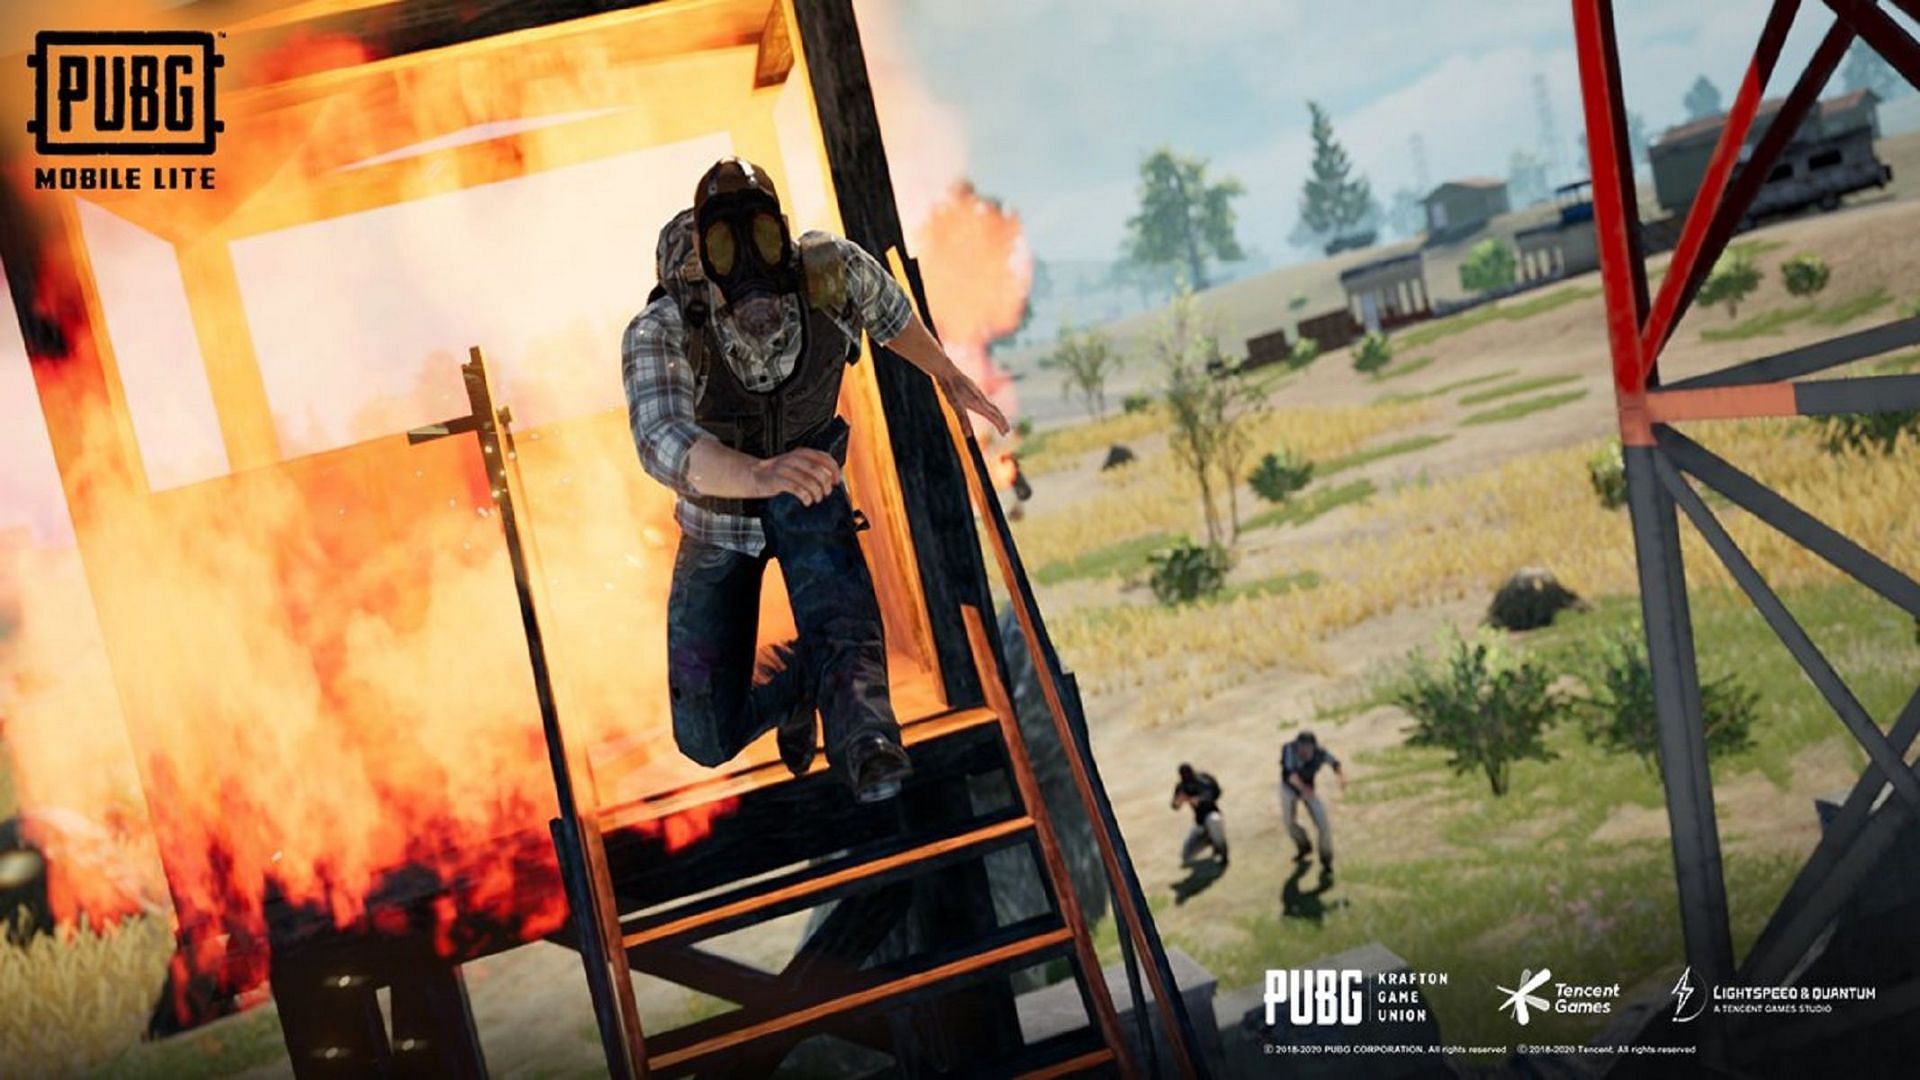 Steps on how players can download PUBG Mobile Lite 0.22.0 update (Image via PUBG Mobile Lite)